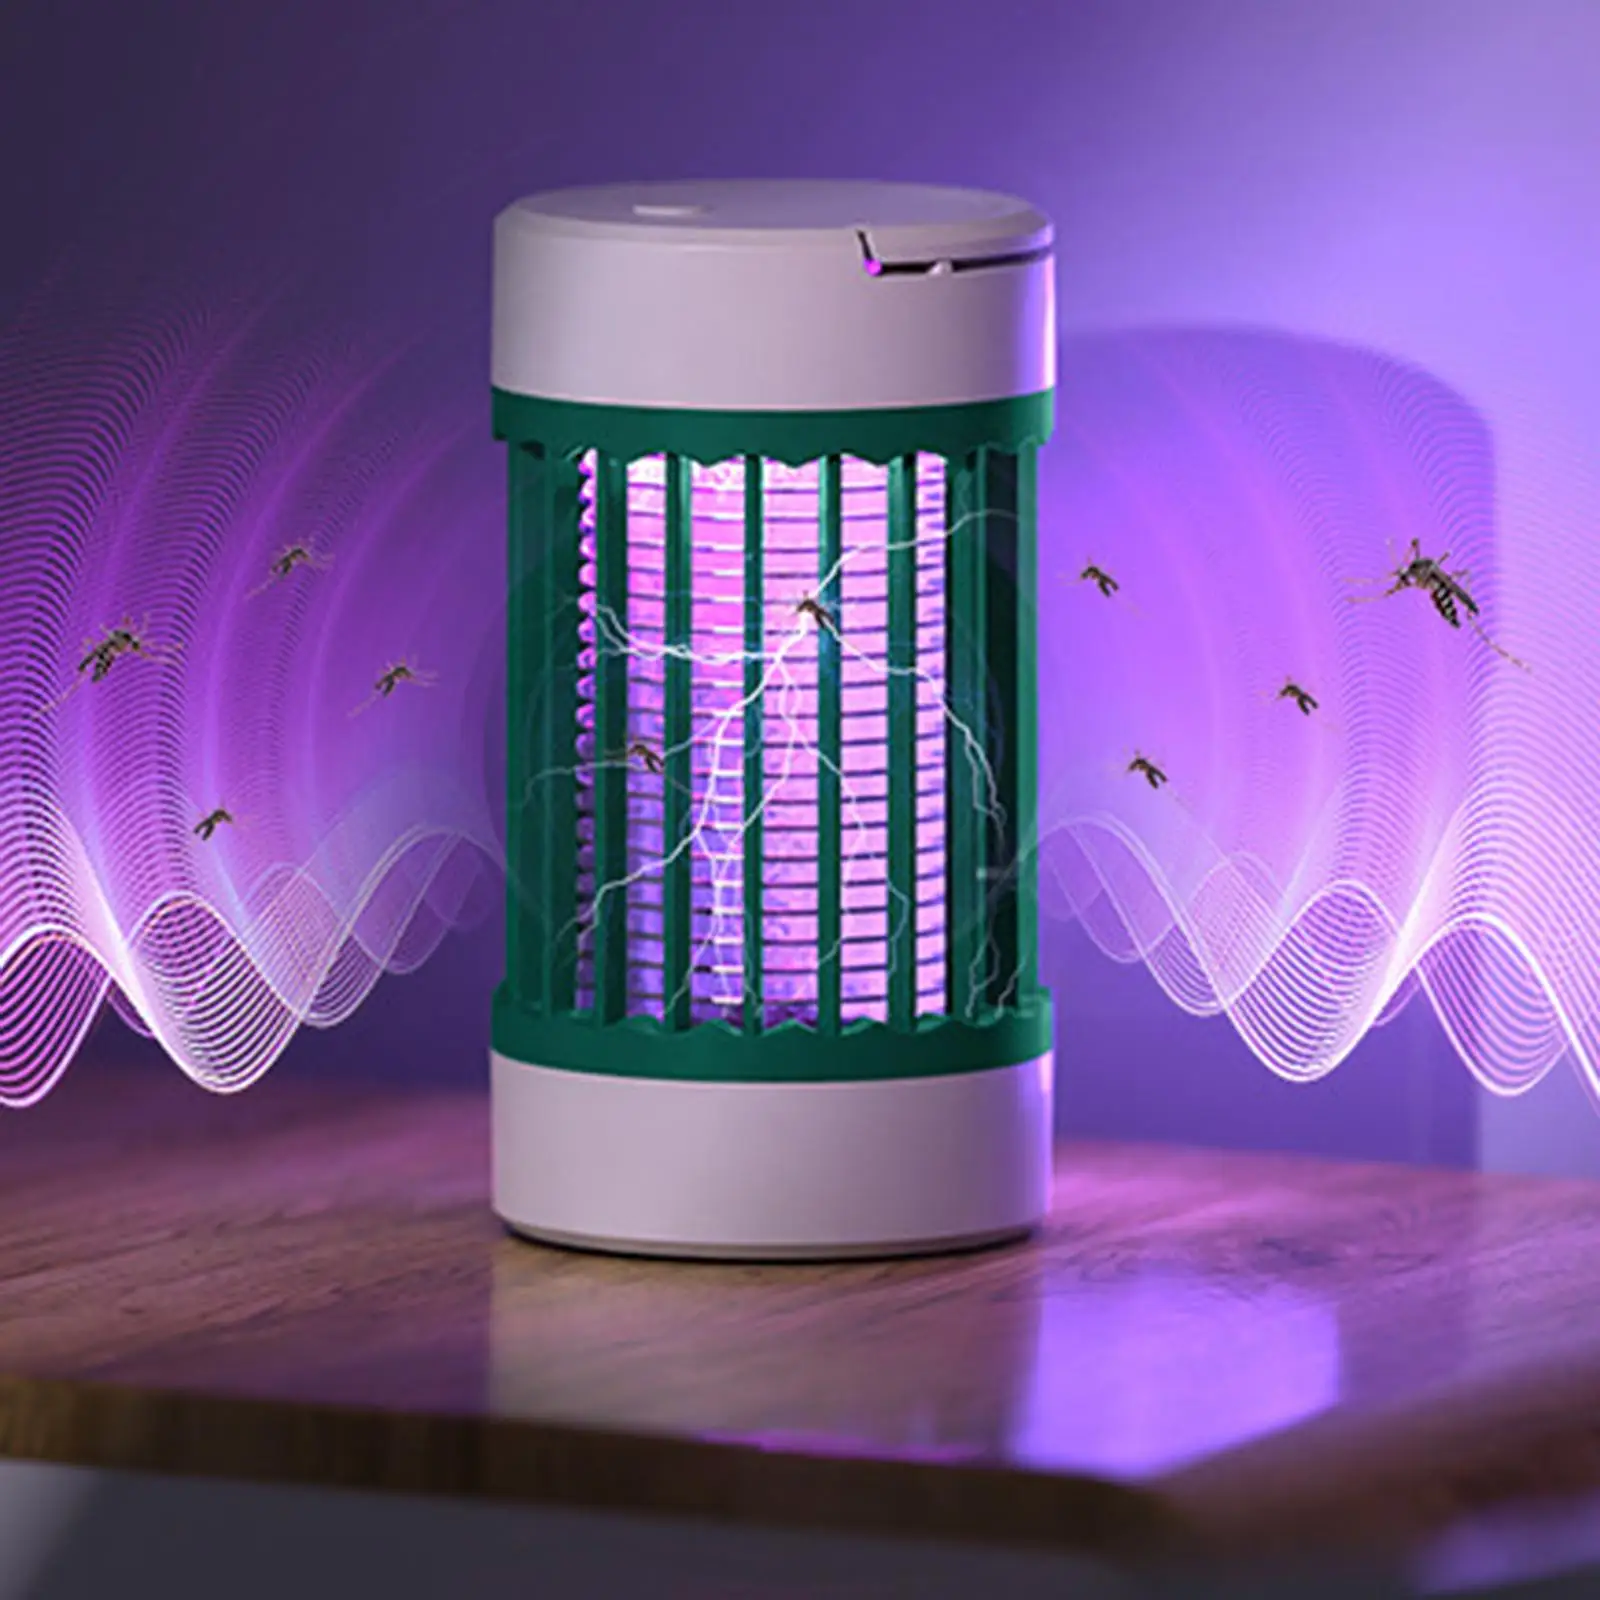 Fly catcher Electric Bug catch USB Direct Plug High Killing Rate Violet catcher Lamp for Outdoor